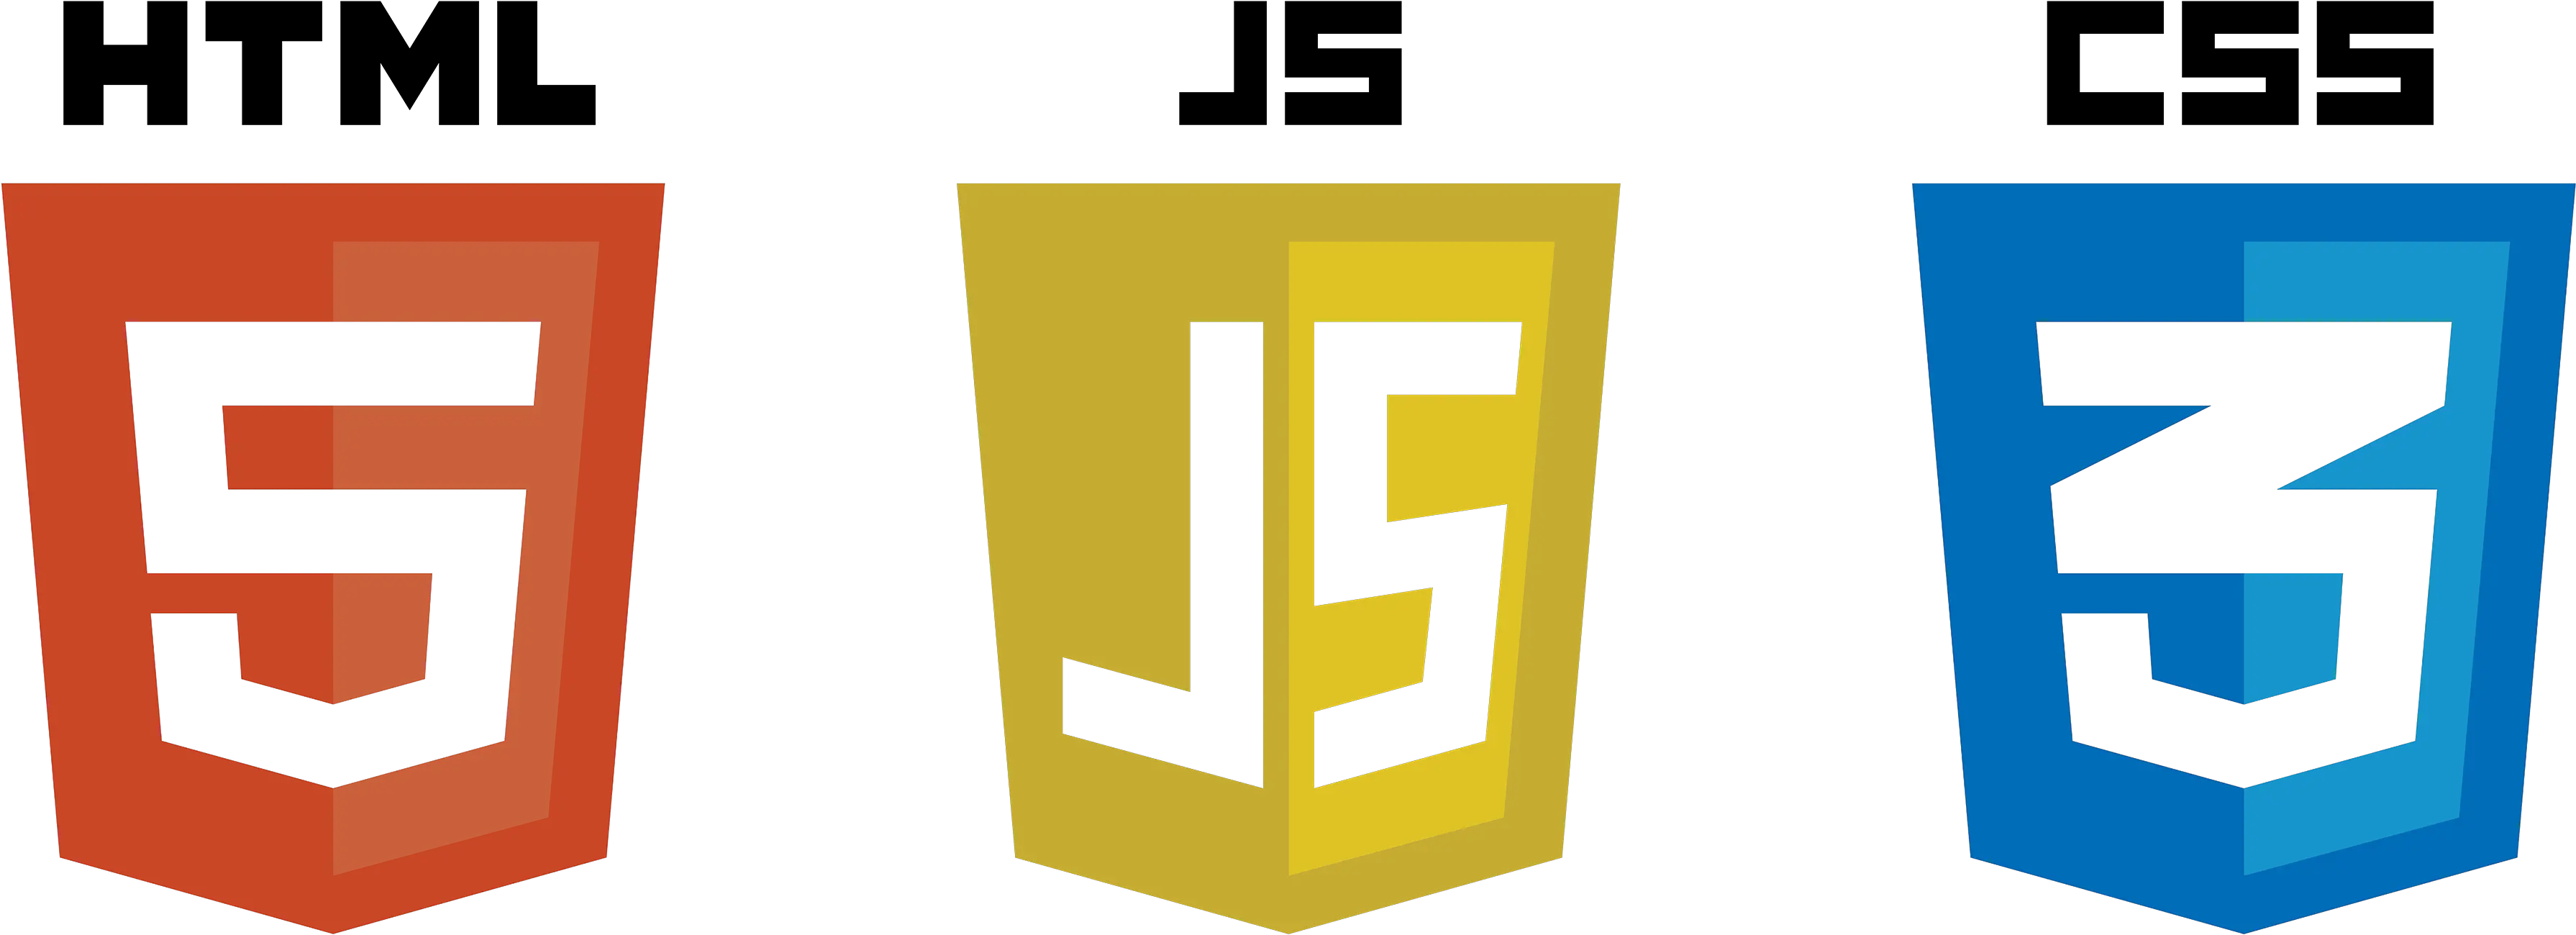 Programming In Html5 With Javascript And Css3 U2013 Our Digital Html Css Js Icons Png Java Logo Transparent